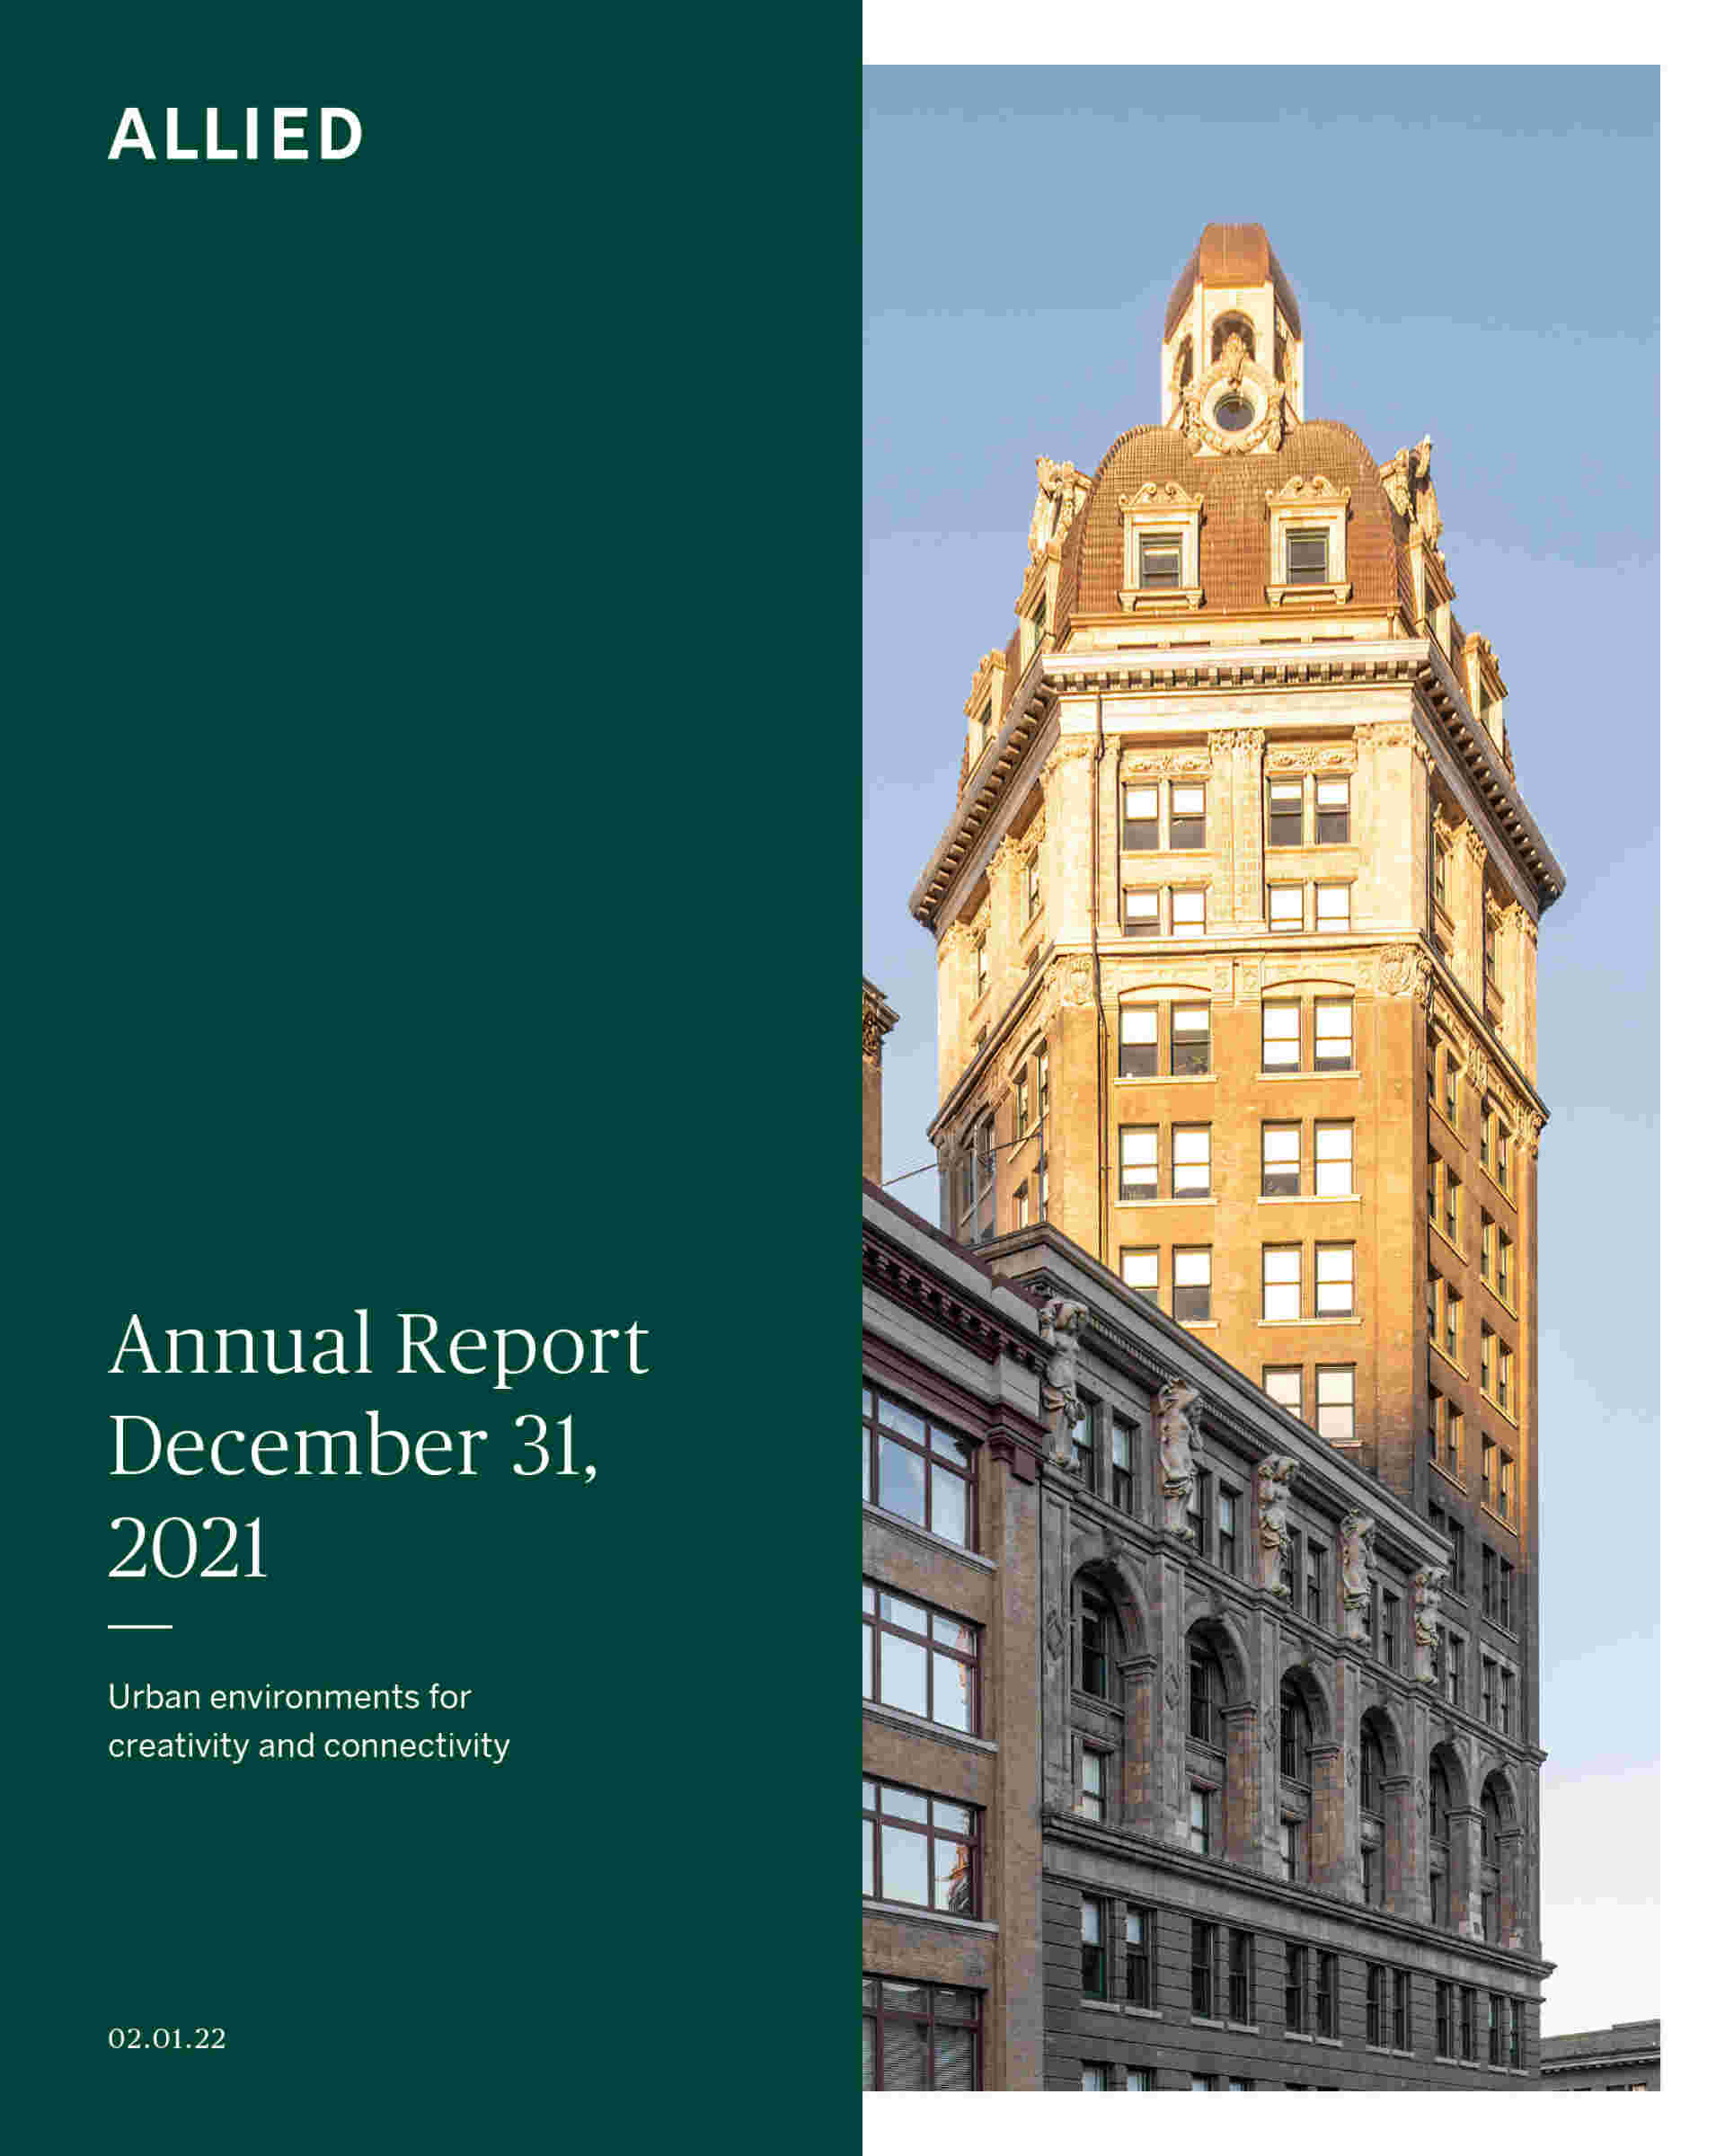 Financial Reports 2021 - Allied-REIT-Q4-2021-Annual-Report-FINAL-1